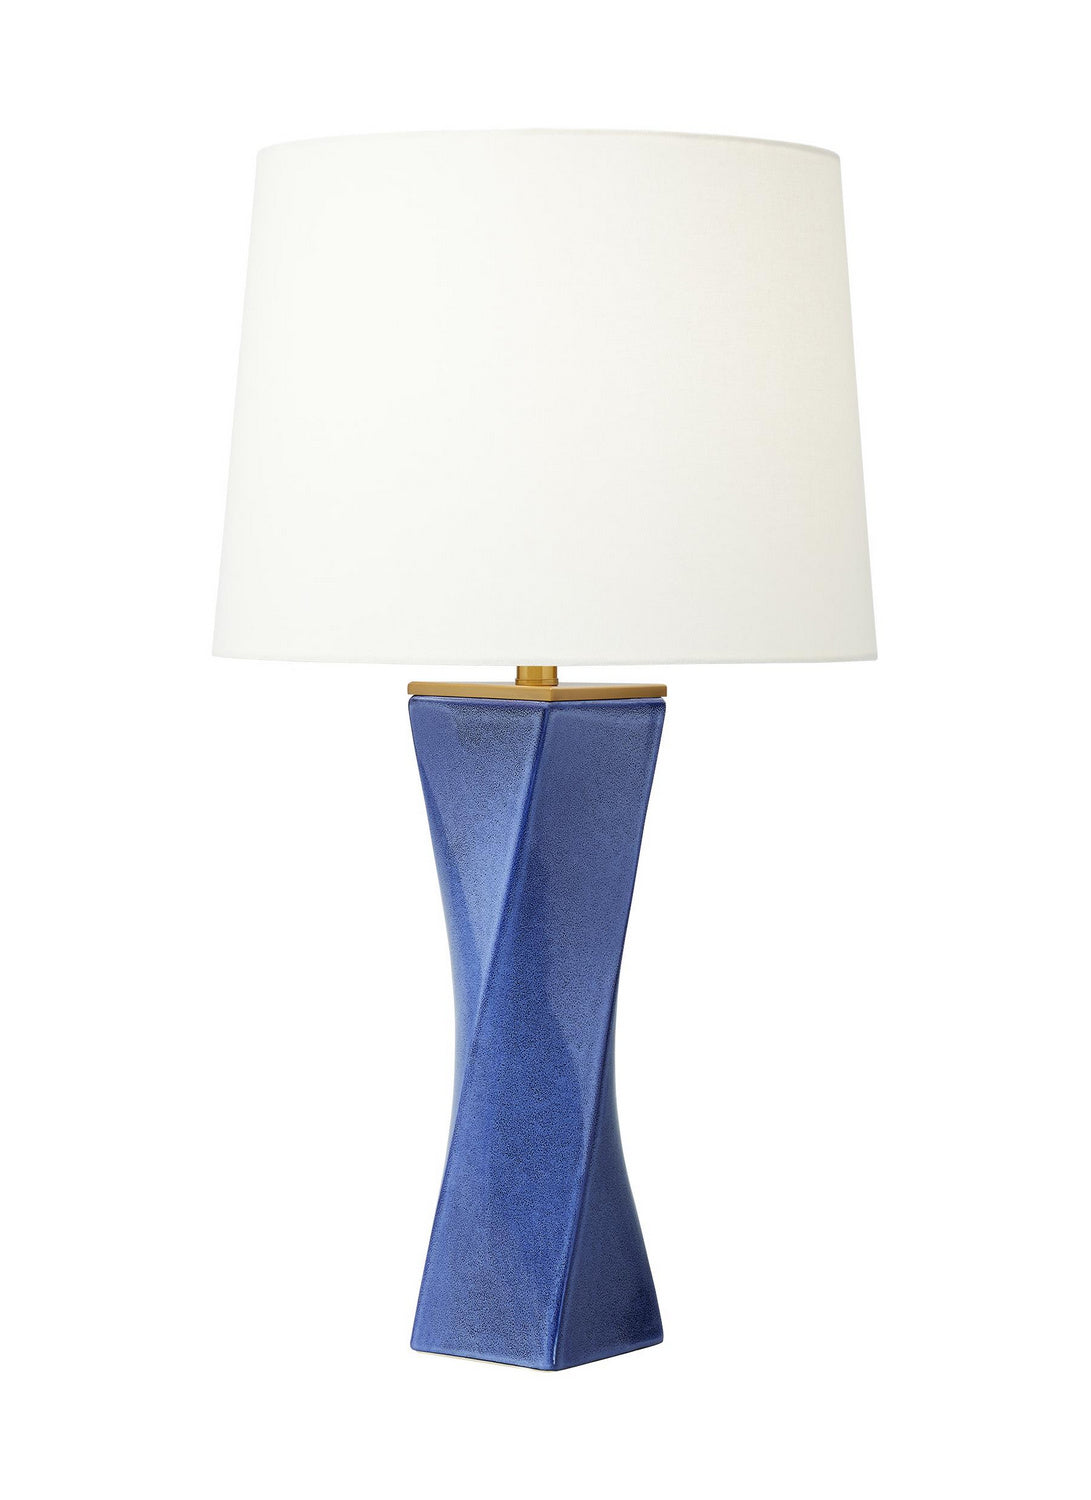 Visual Comfort Studio Canada - One Light Table Lamp - Lagos - Frosted Blue- Union Lighting Luminaires Decor